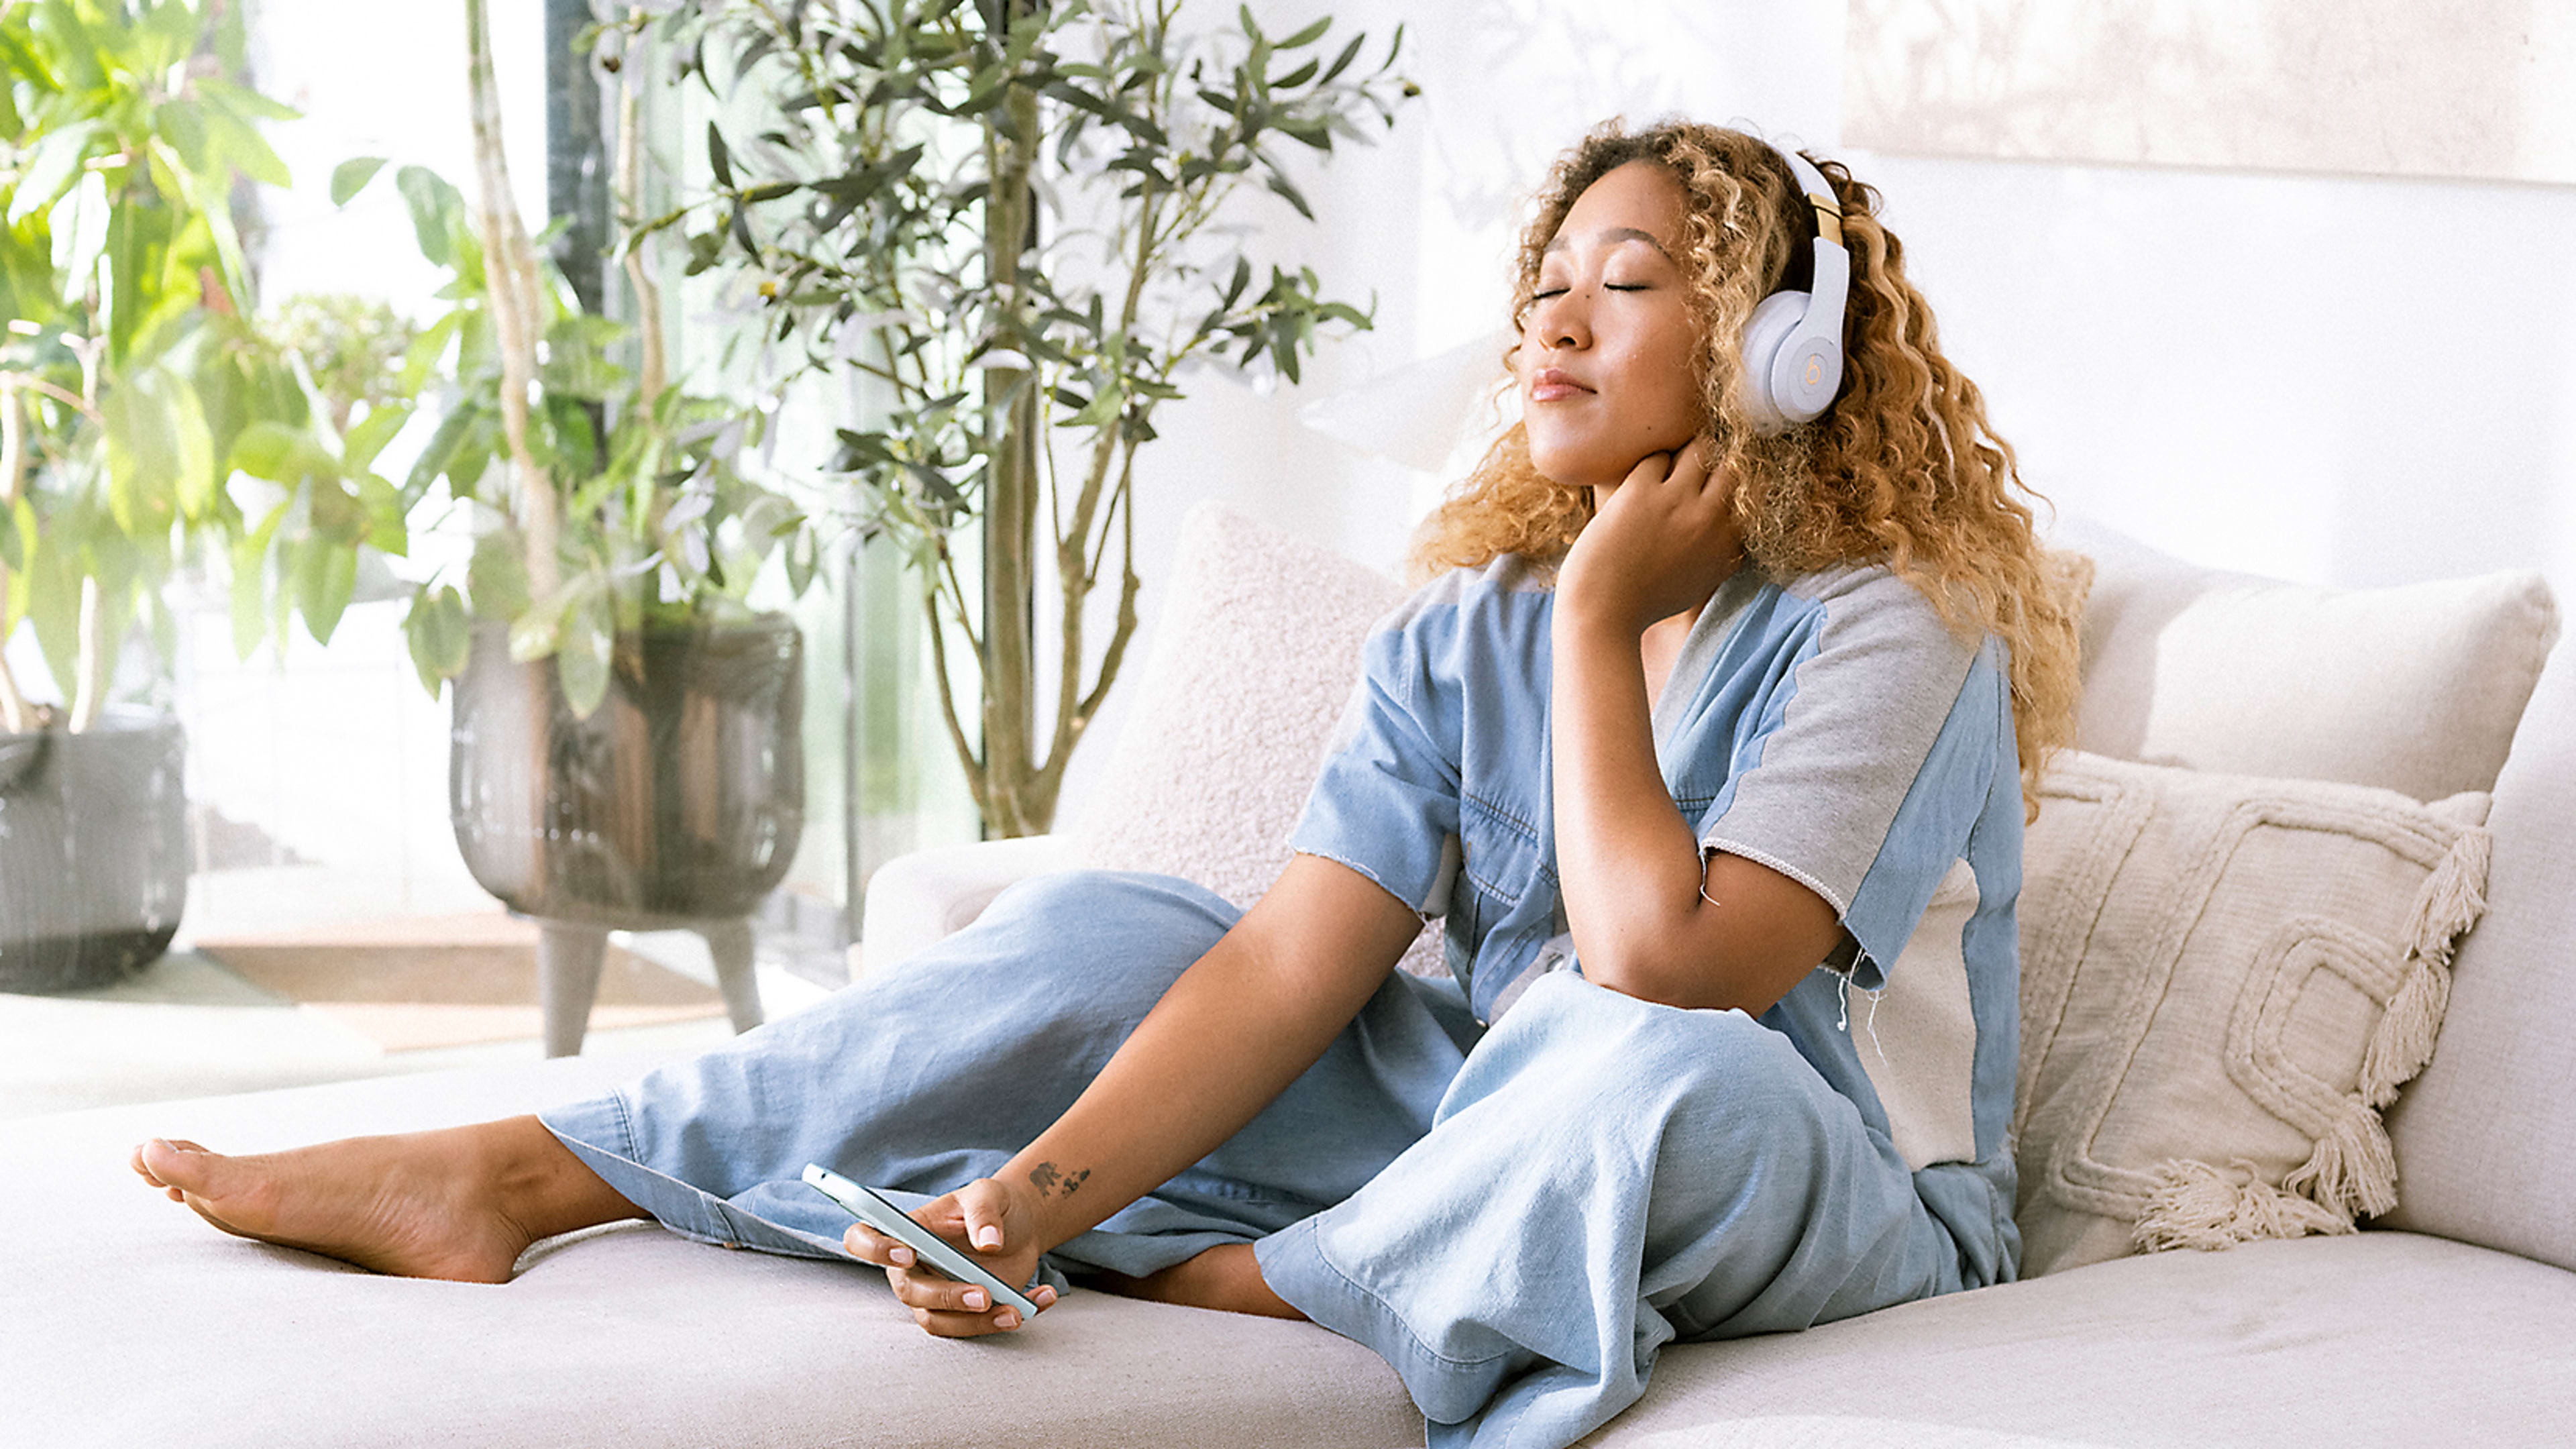 Naomi Osaka wants to take you on a guided meditation, courtesy of Hyperice and Modern Health